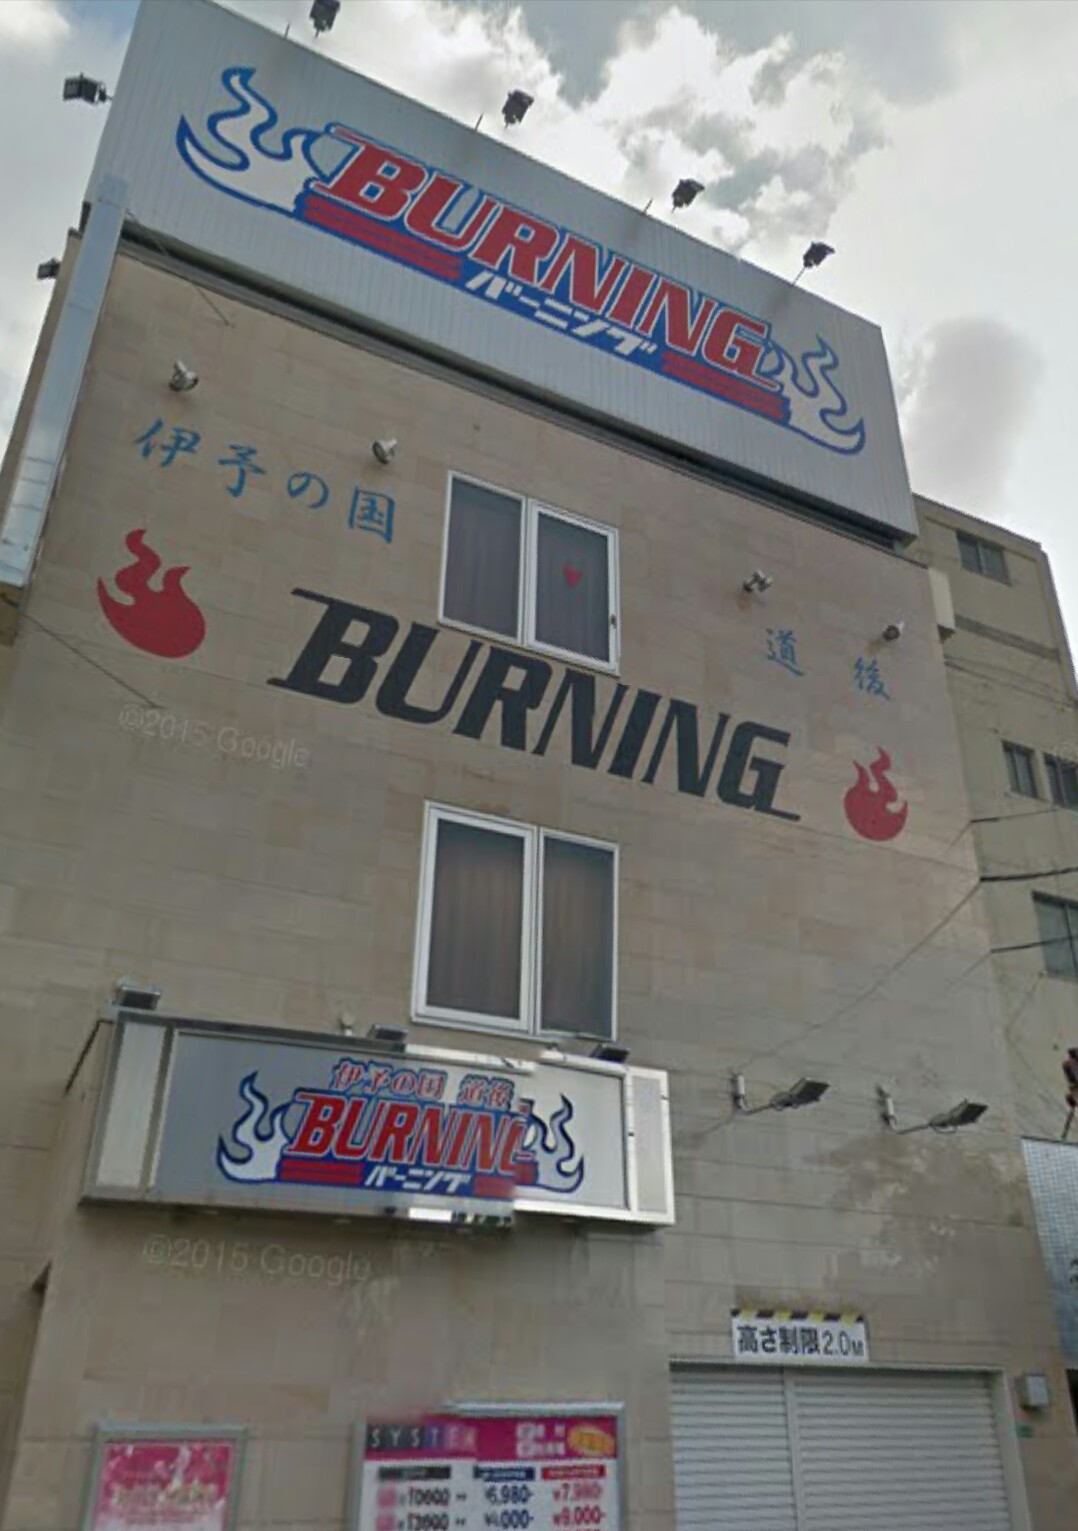 Bleach Logo Reworked By Japanese Sex Industry